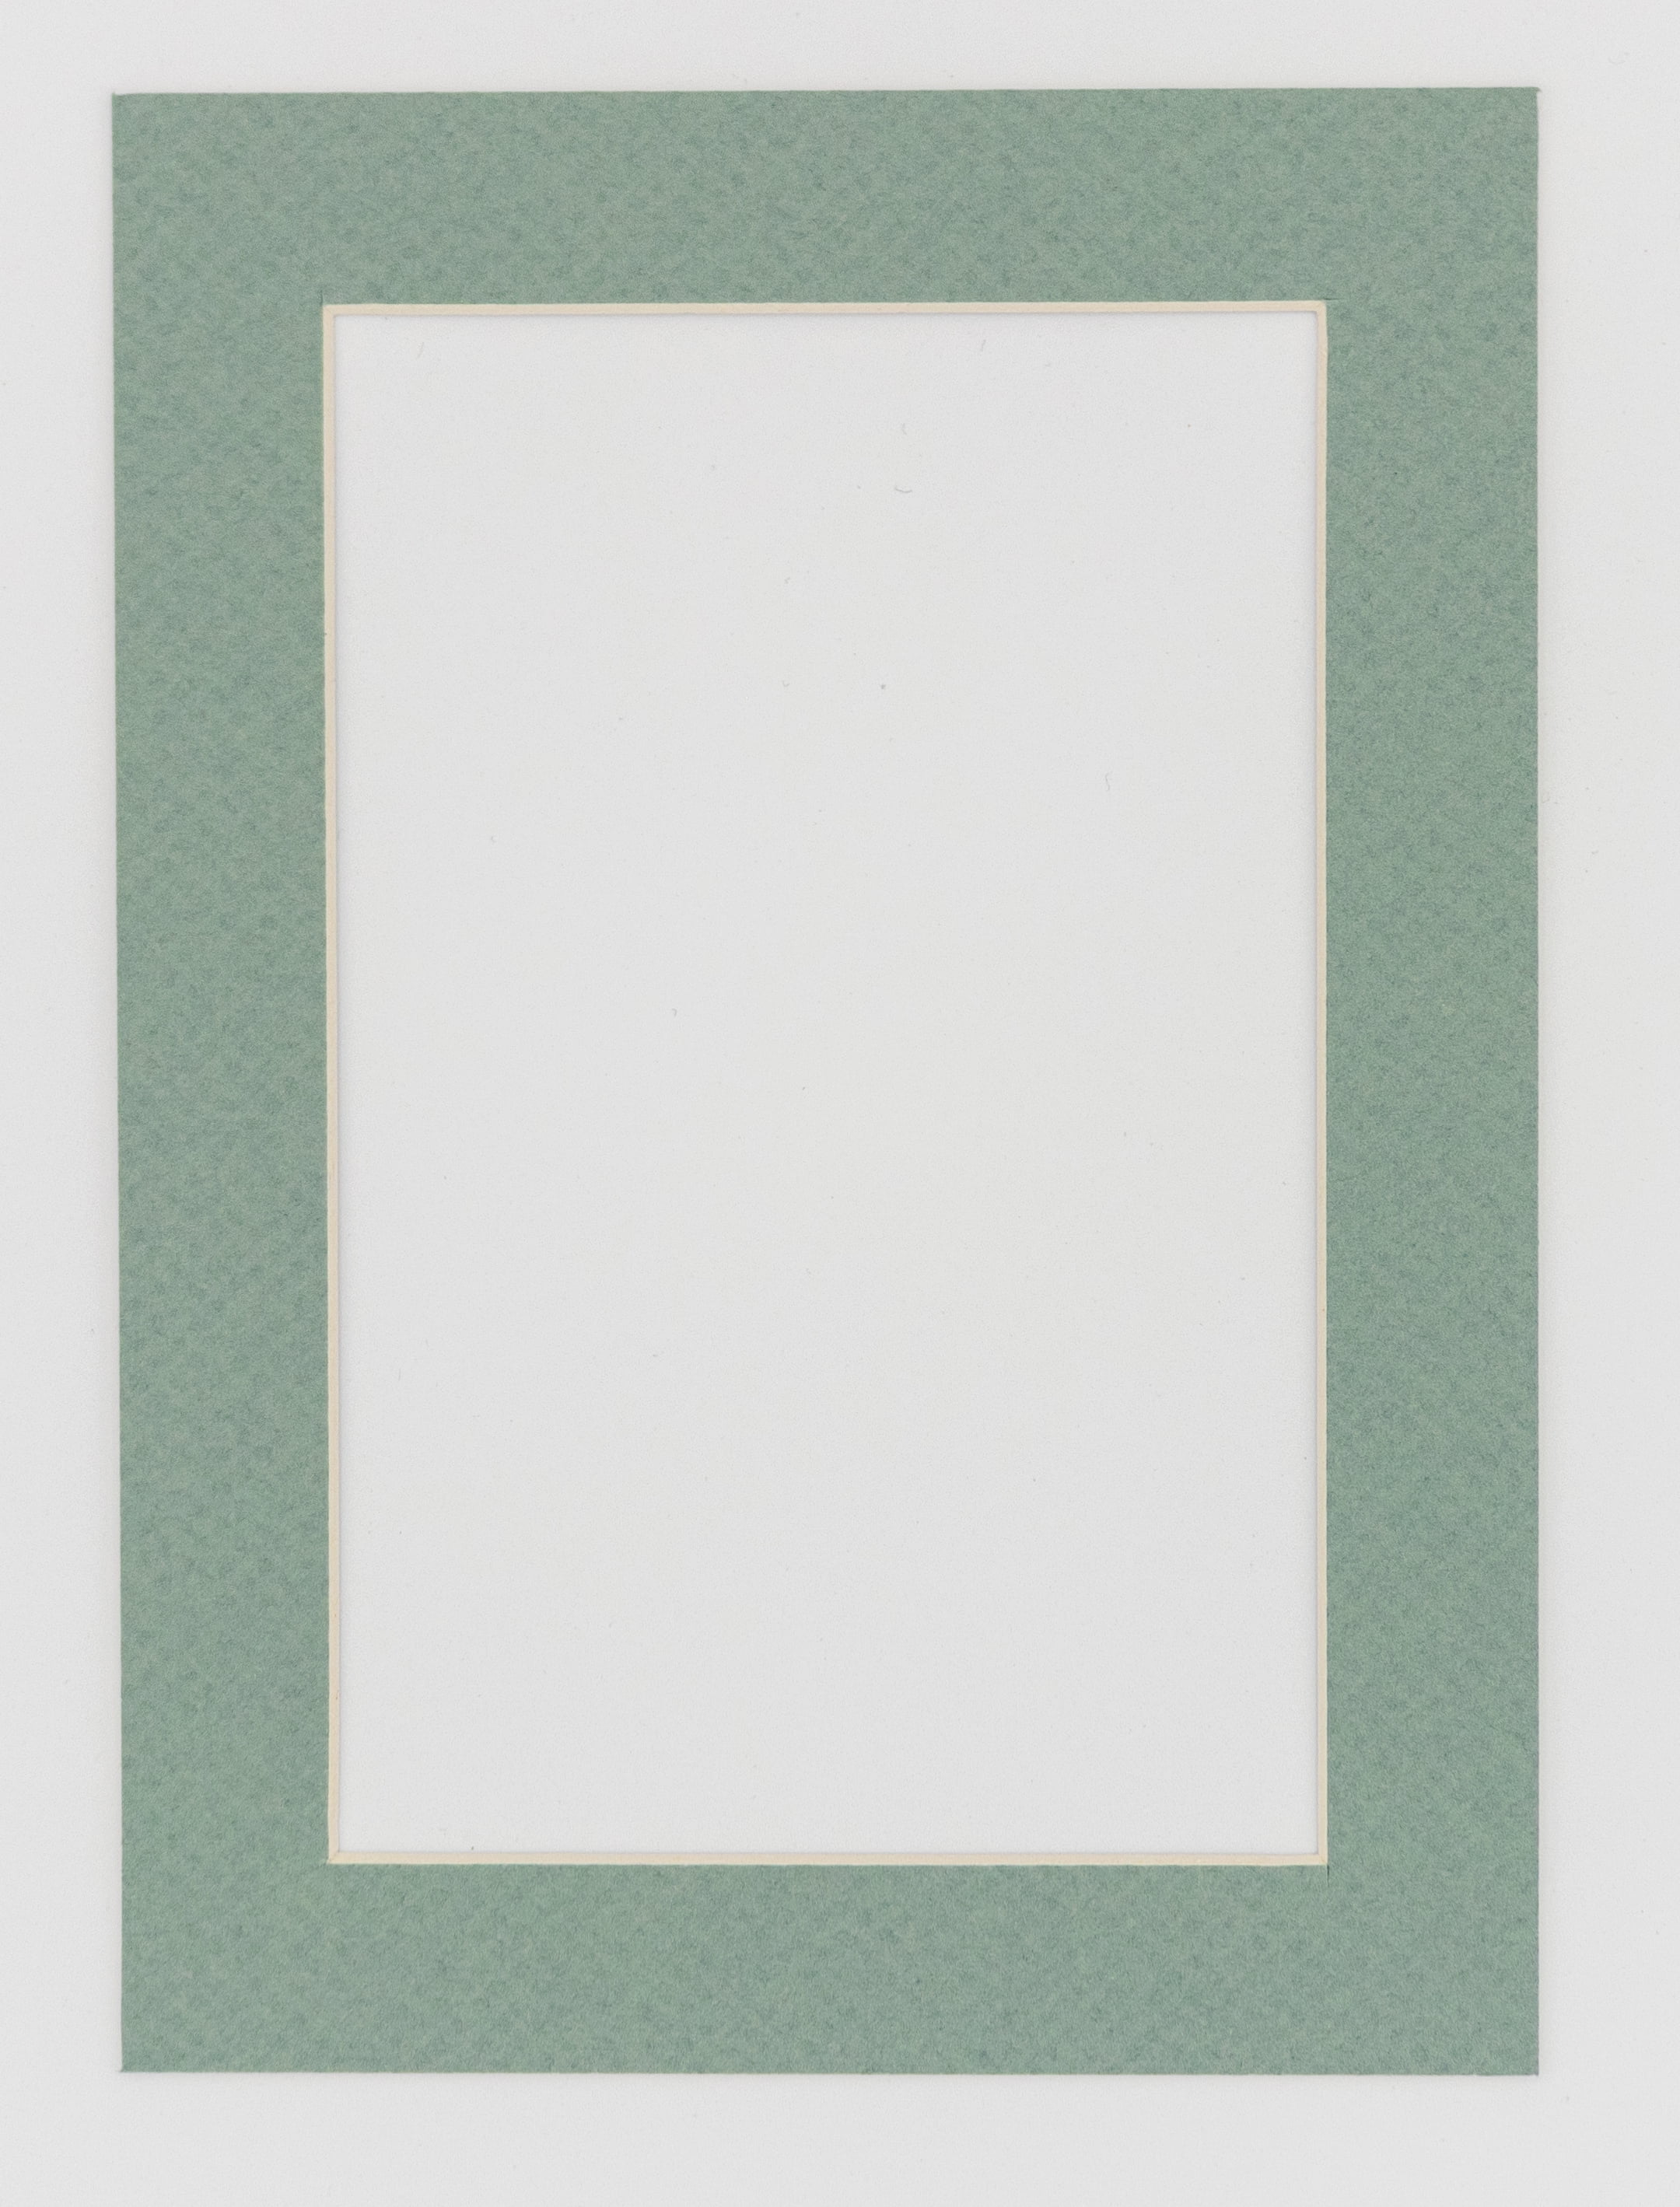 CustomPictureFrames 24x36 White Picture Mats Mattes Matting with White Core, for 20x30 Pictures